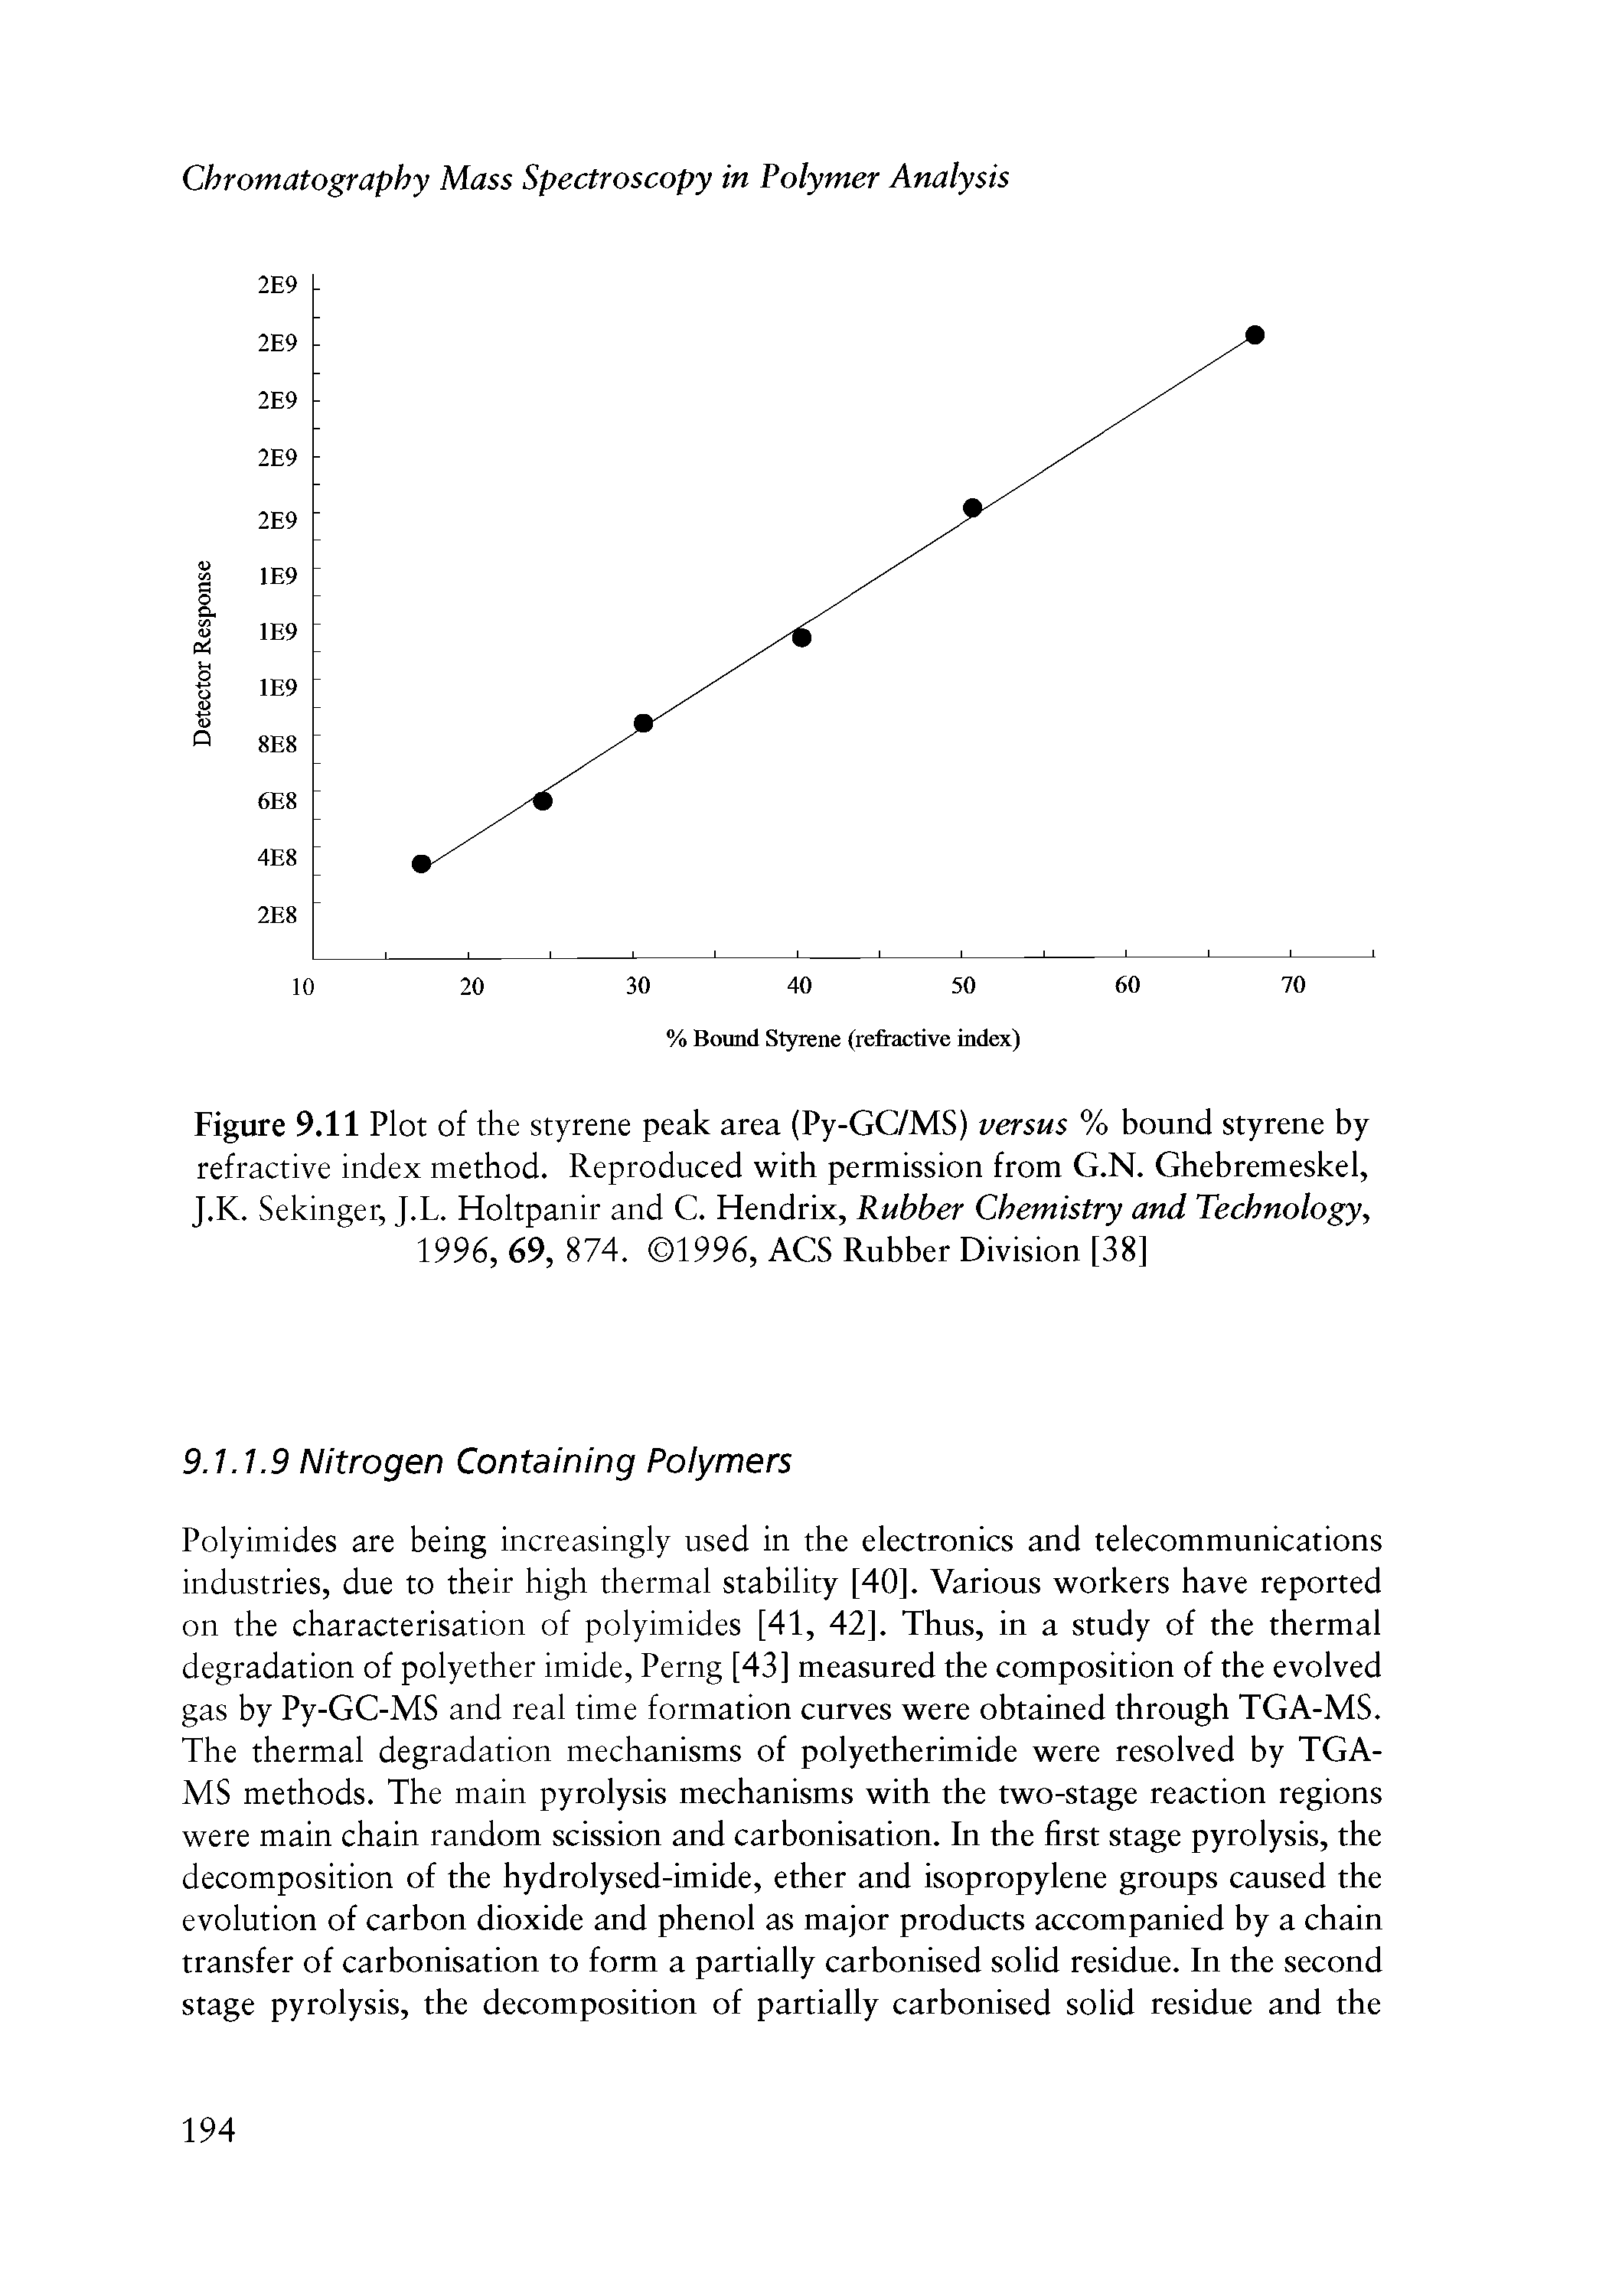 Figure 9.11 Plot of the styrene peak area (Py-GC/MS) versus % bound styrene by refractive index method. Reproduced with permission from G.N. Ghebremeskel, J.K. Sekinger, J.L. Holtpanir and C. Hendrix, Rubber Chemistry and Technology, 1996, 69, 874. 1996, ACS Rubber Division [38]...